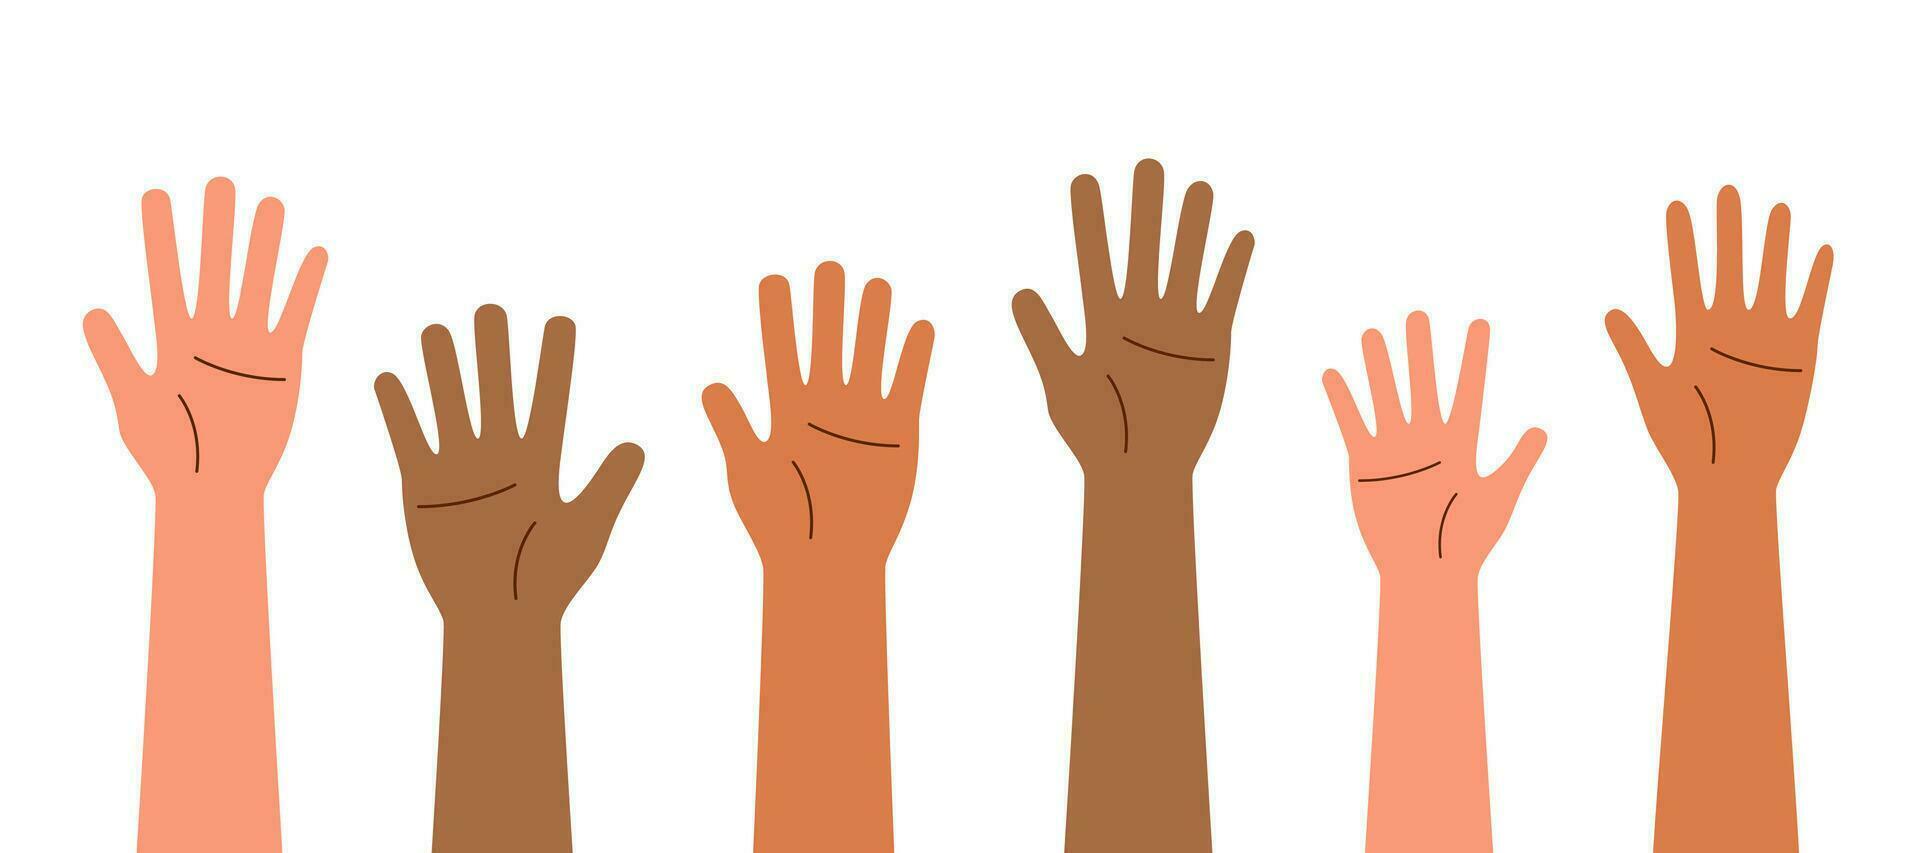 Human hands raised up isolated on white vector